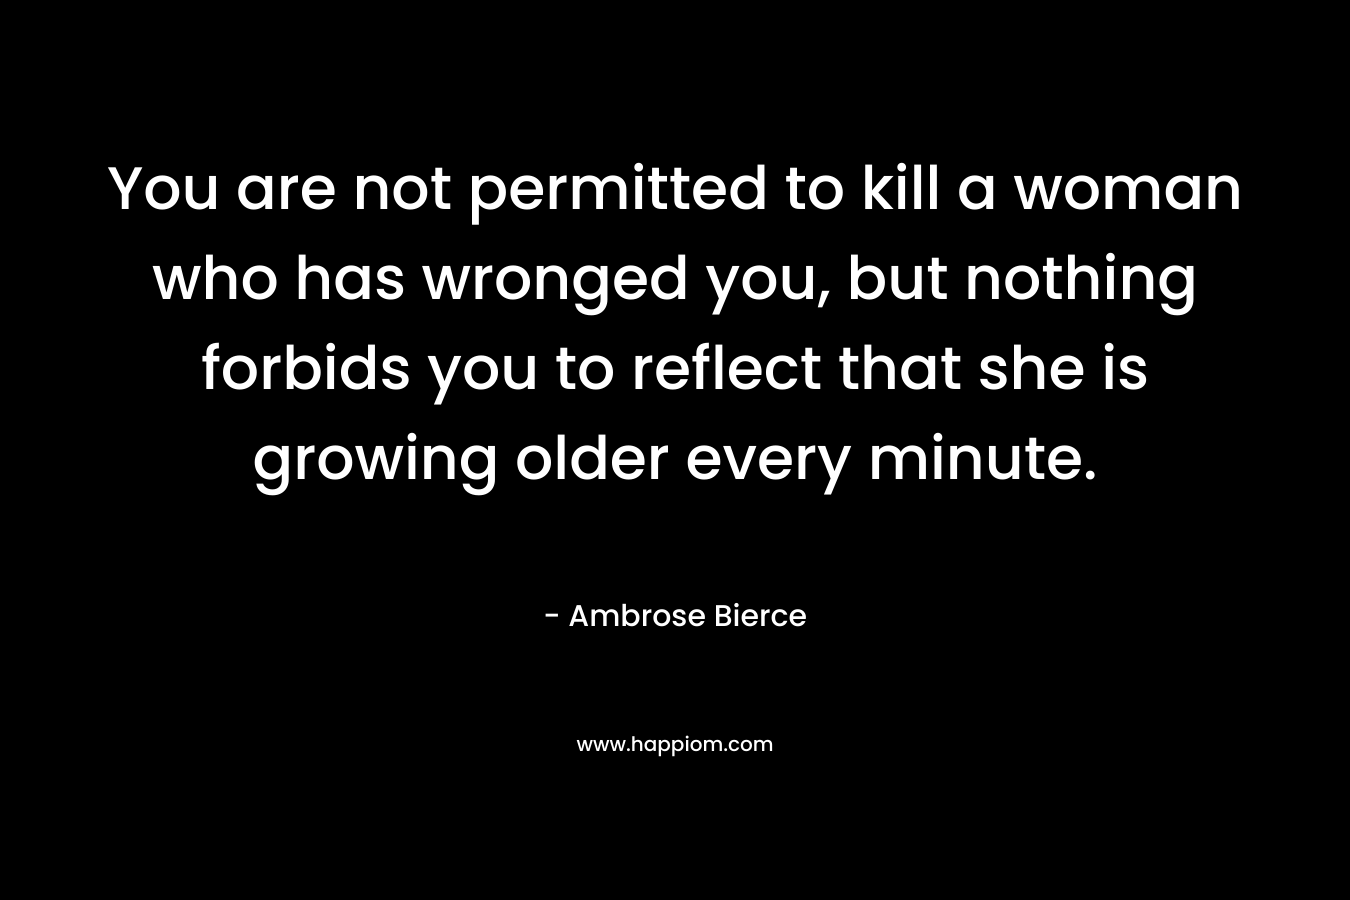 You are not permitted to kill a woman who has wronged you, but nothing forbids you to reflect that she is growing older every minute. – Ambrose Bierce